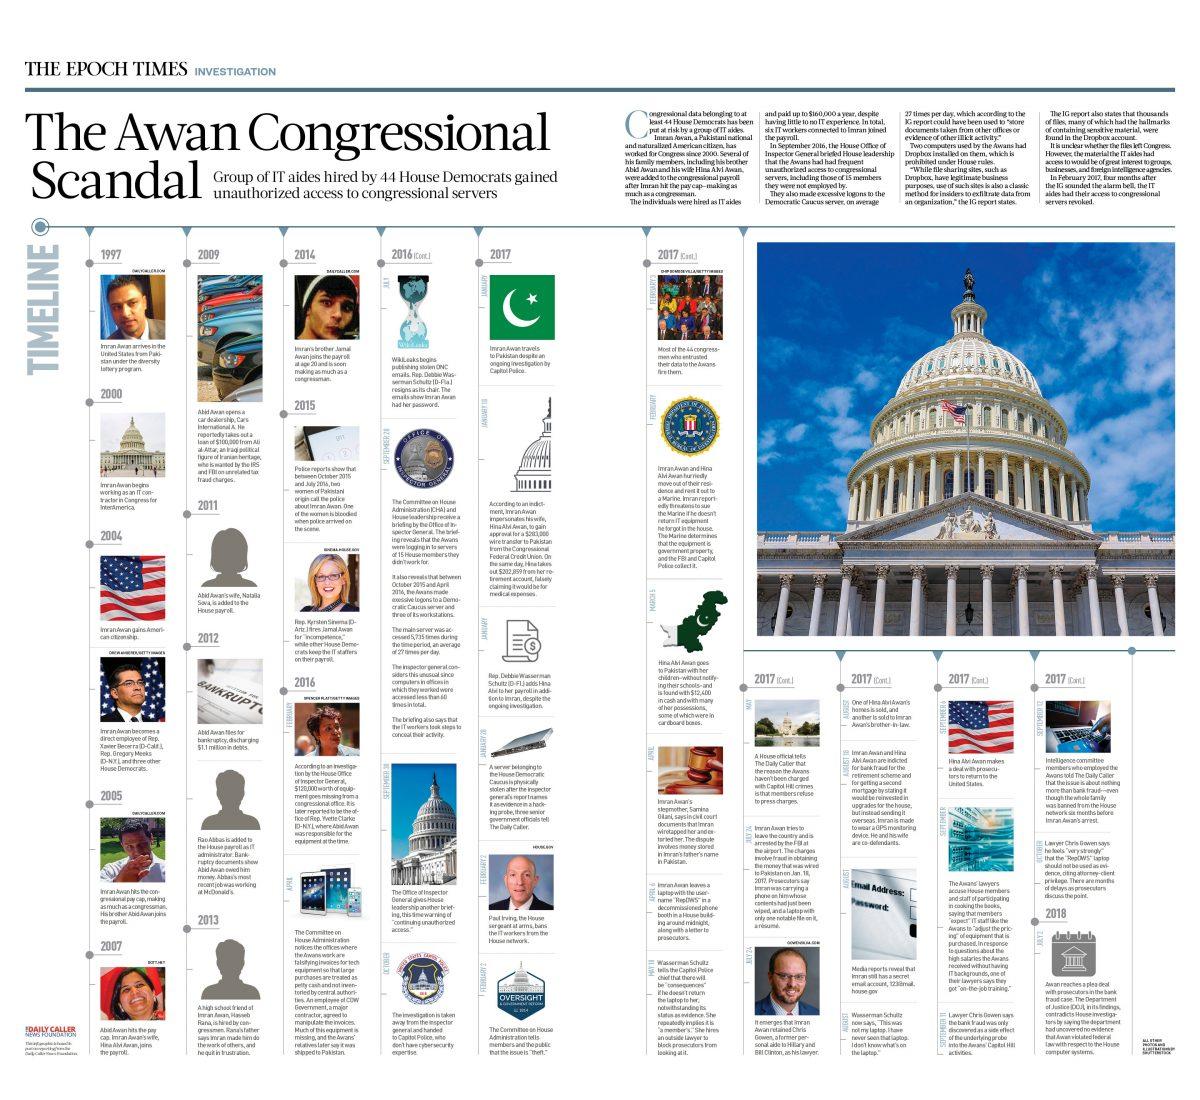 Click on the timeline to <a href="https://www.theepochtimes.com/assets/uploads/2018/08/20/The-Awan-Congressional-Scandal_V2.jpg">enlarge</a>.